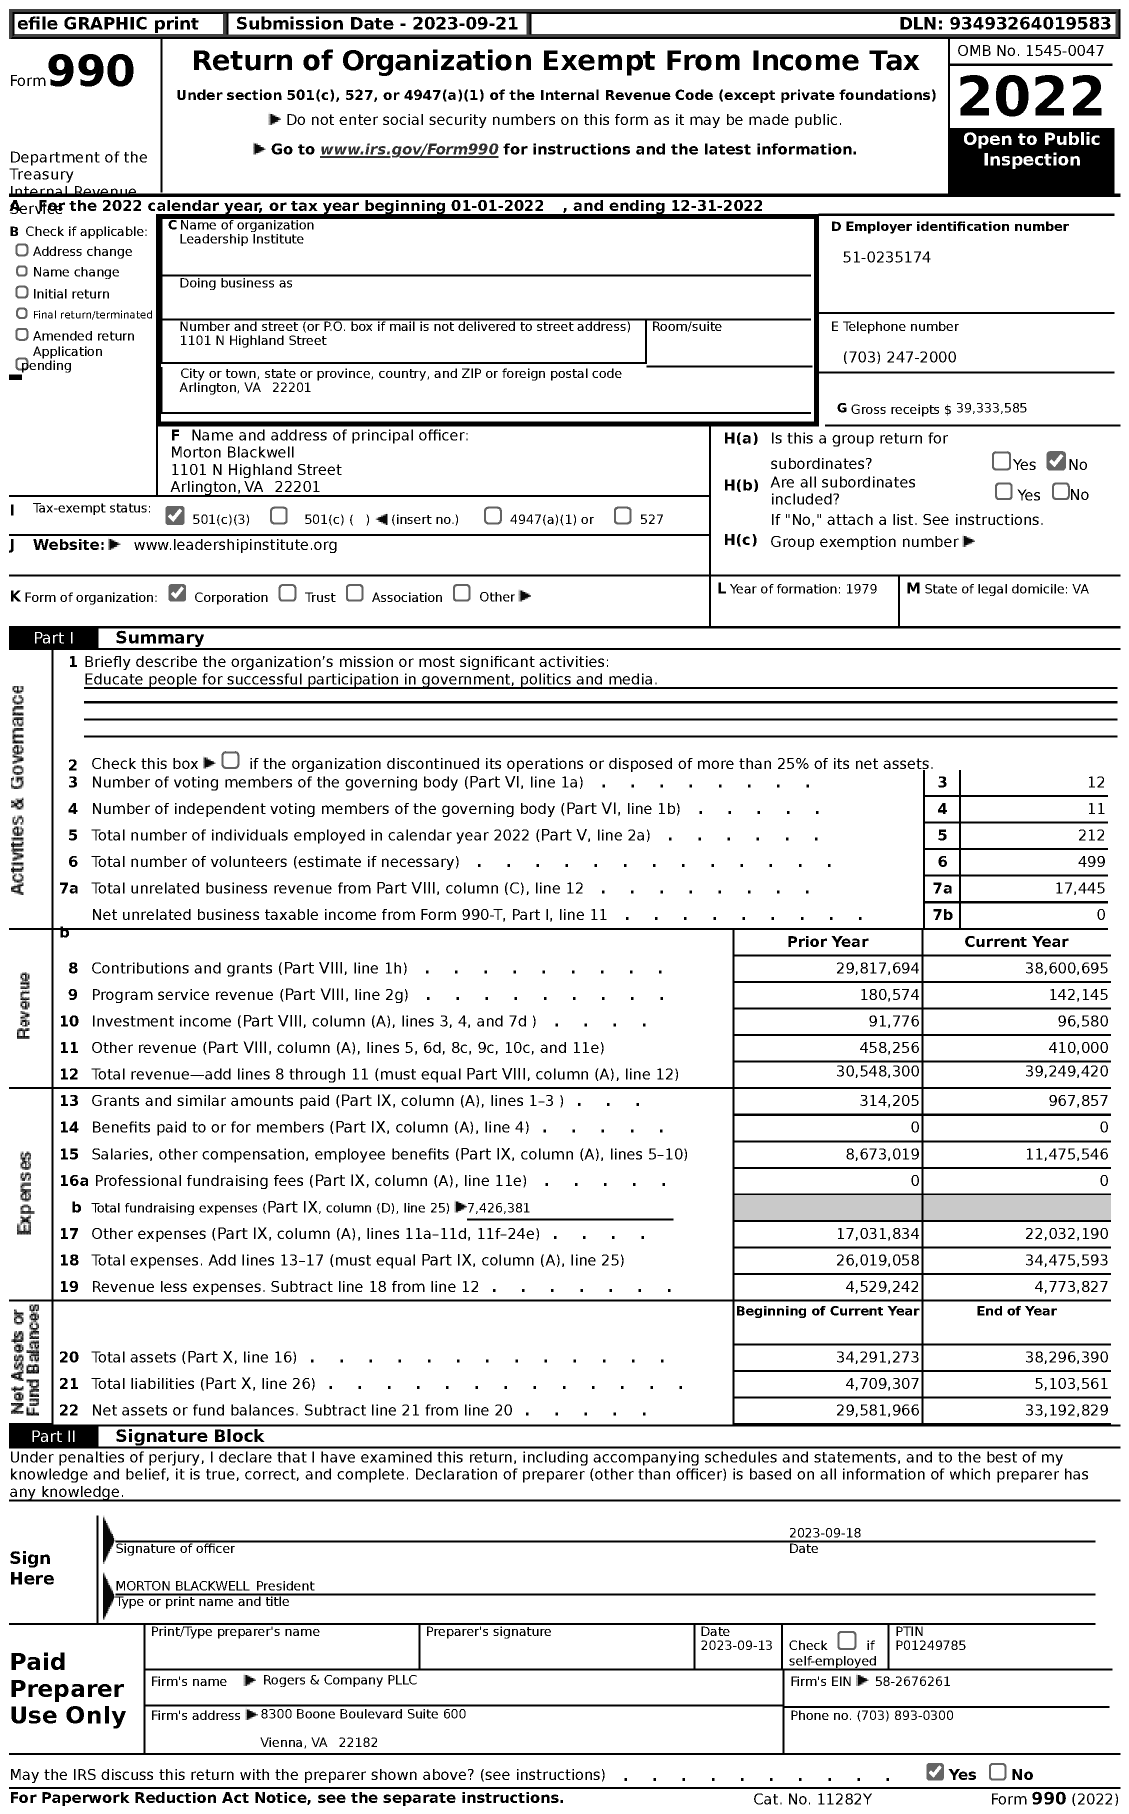 Image of first page of 2022 Form 990 for Leadership Institute (LI)